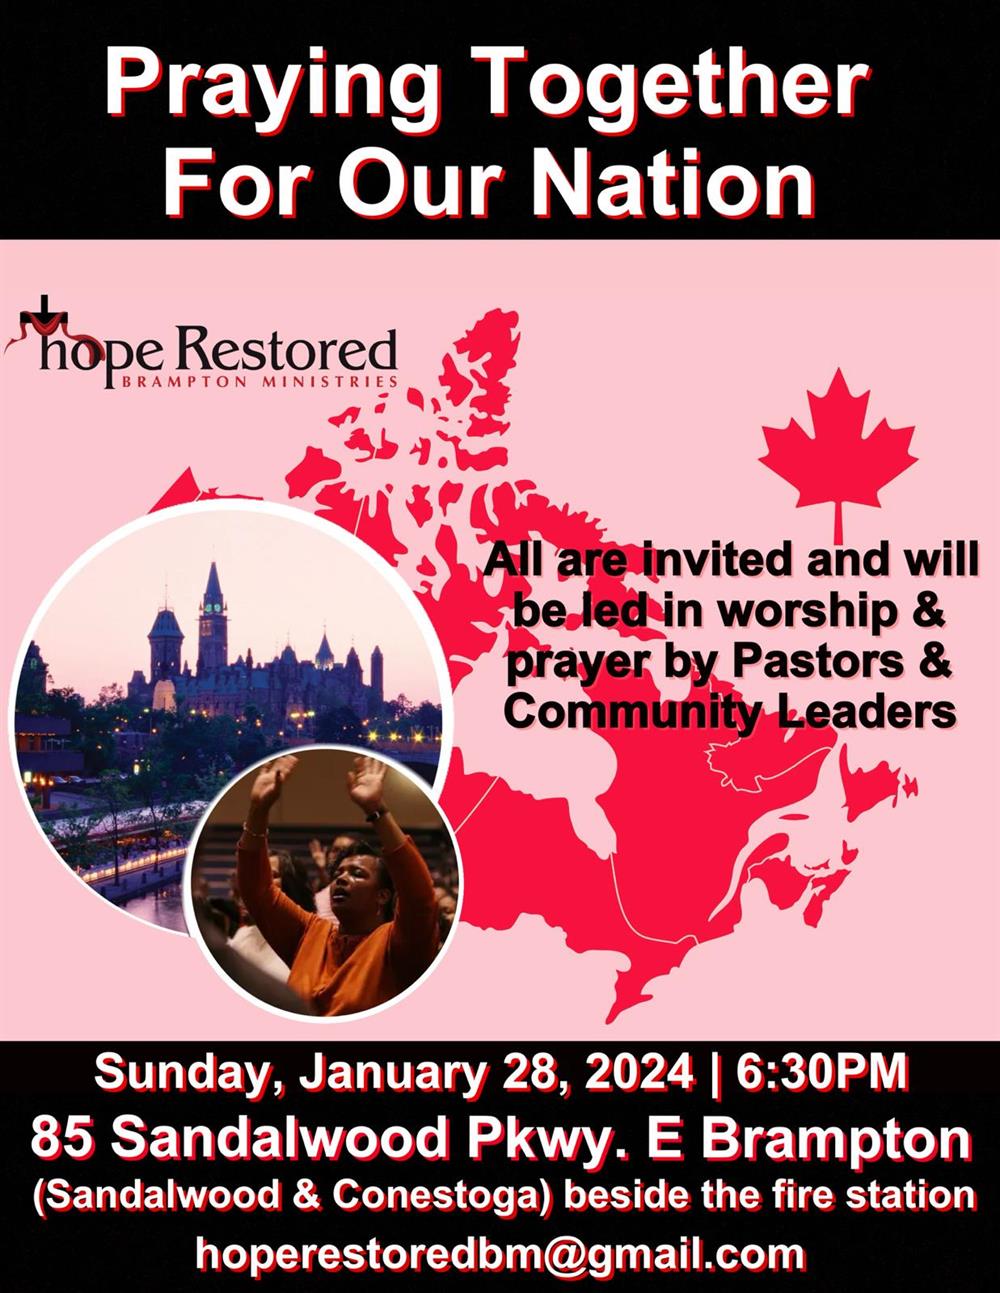 Praying together for our nation on January 28, 2024